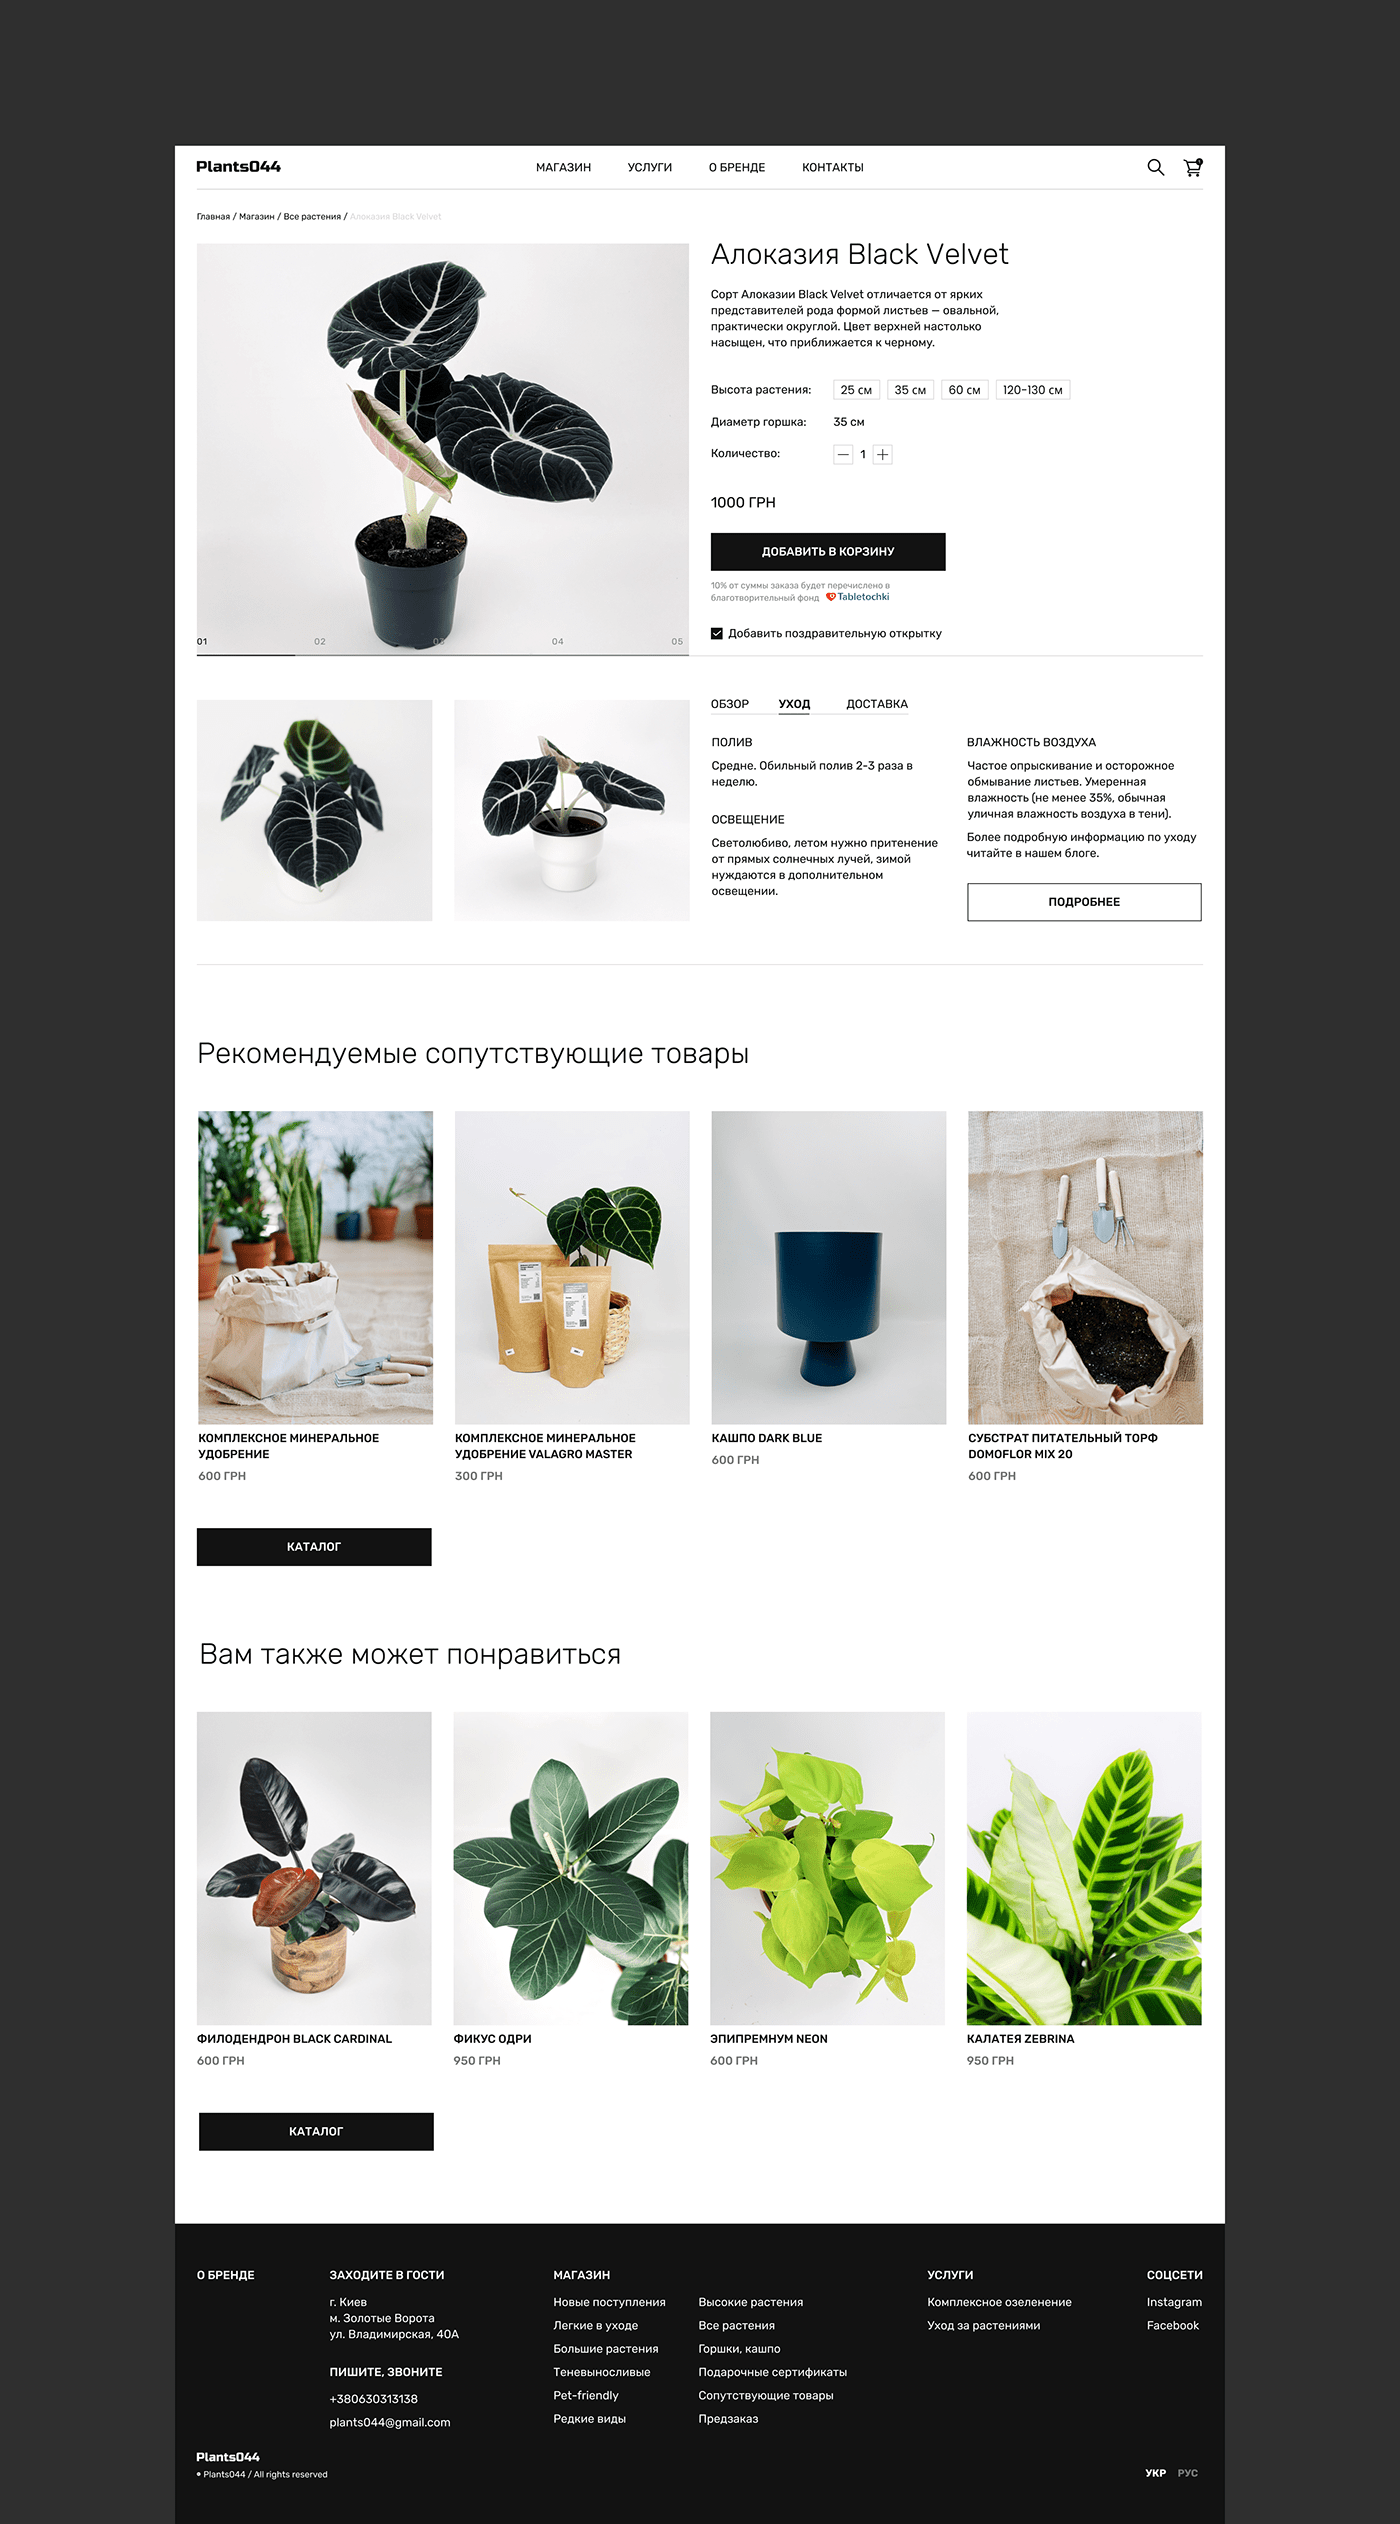 product page
